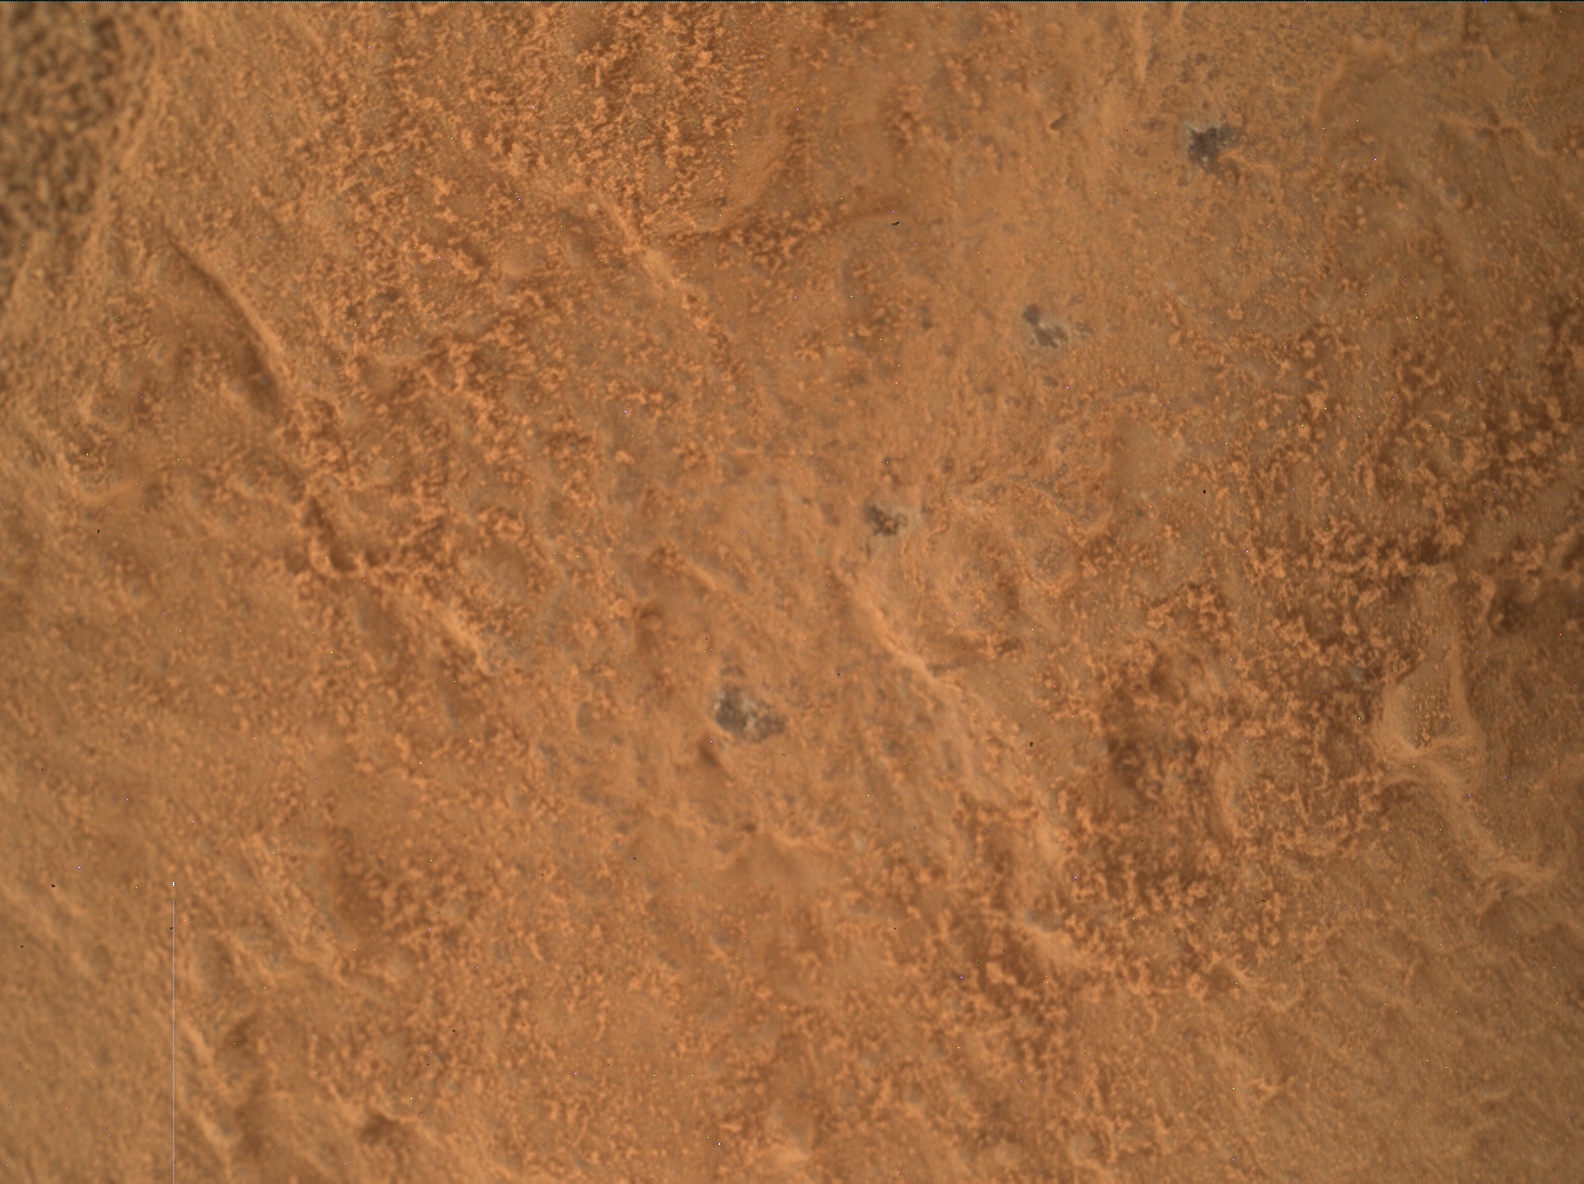 Nasa's Mars rover Curiosity acquired this image using its Mars Hand Lens Imager (MAHLI) on Sol 3381